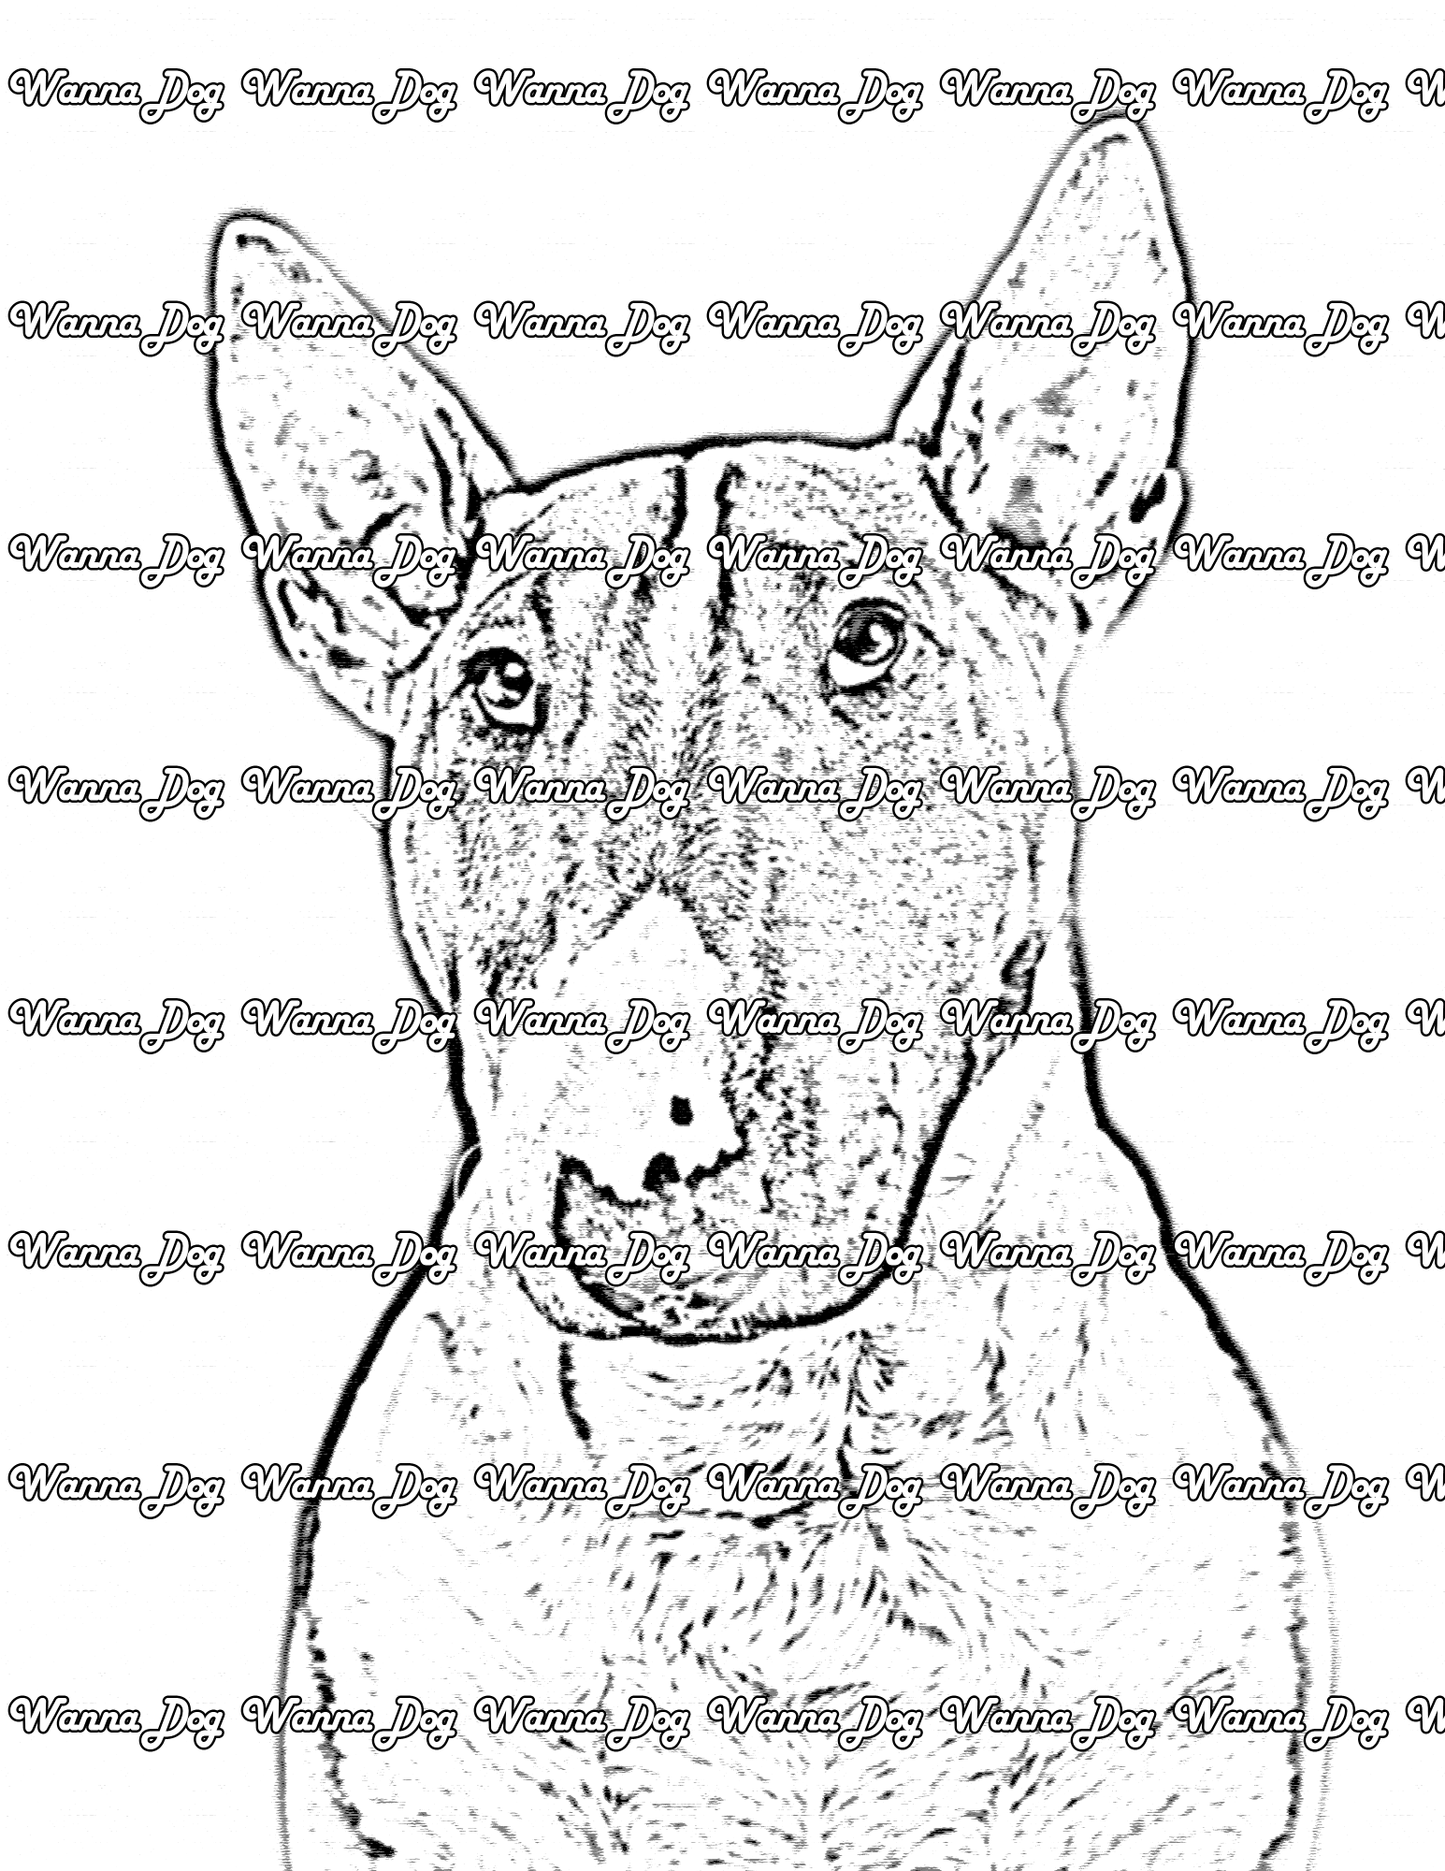 Bull Terrier Coloring Page of a Bull Terrier close up and looking up